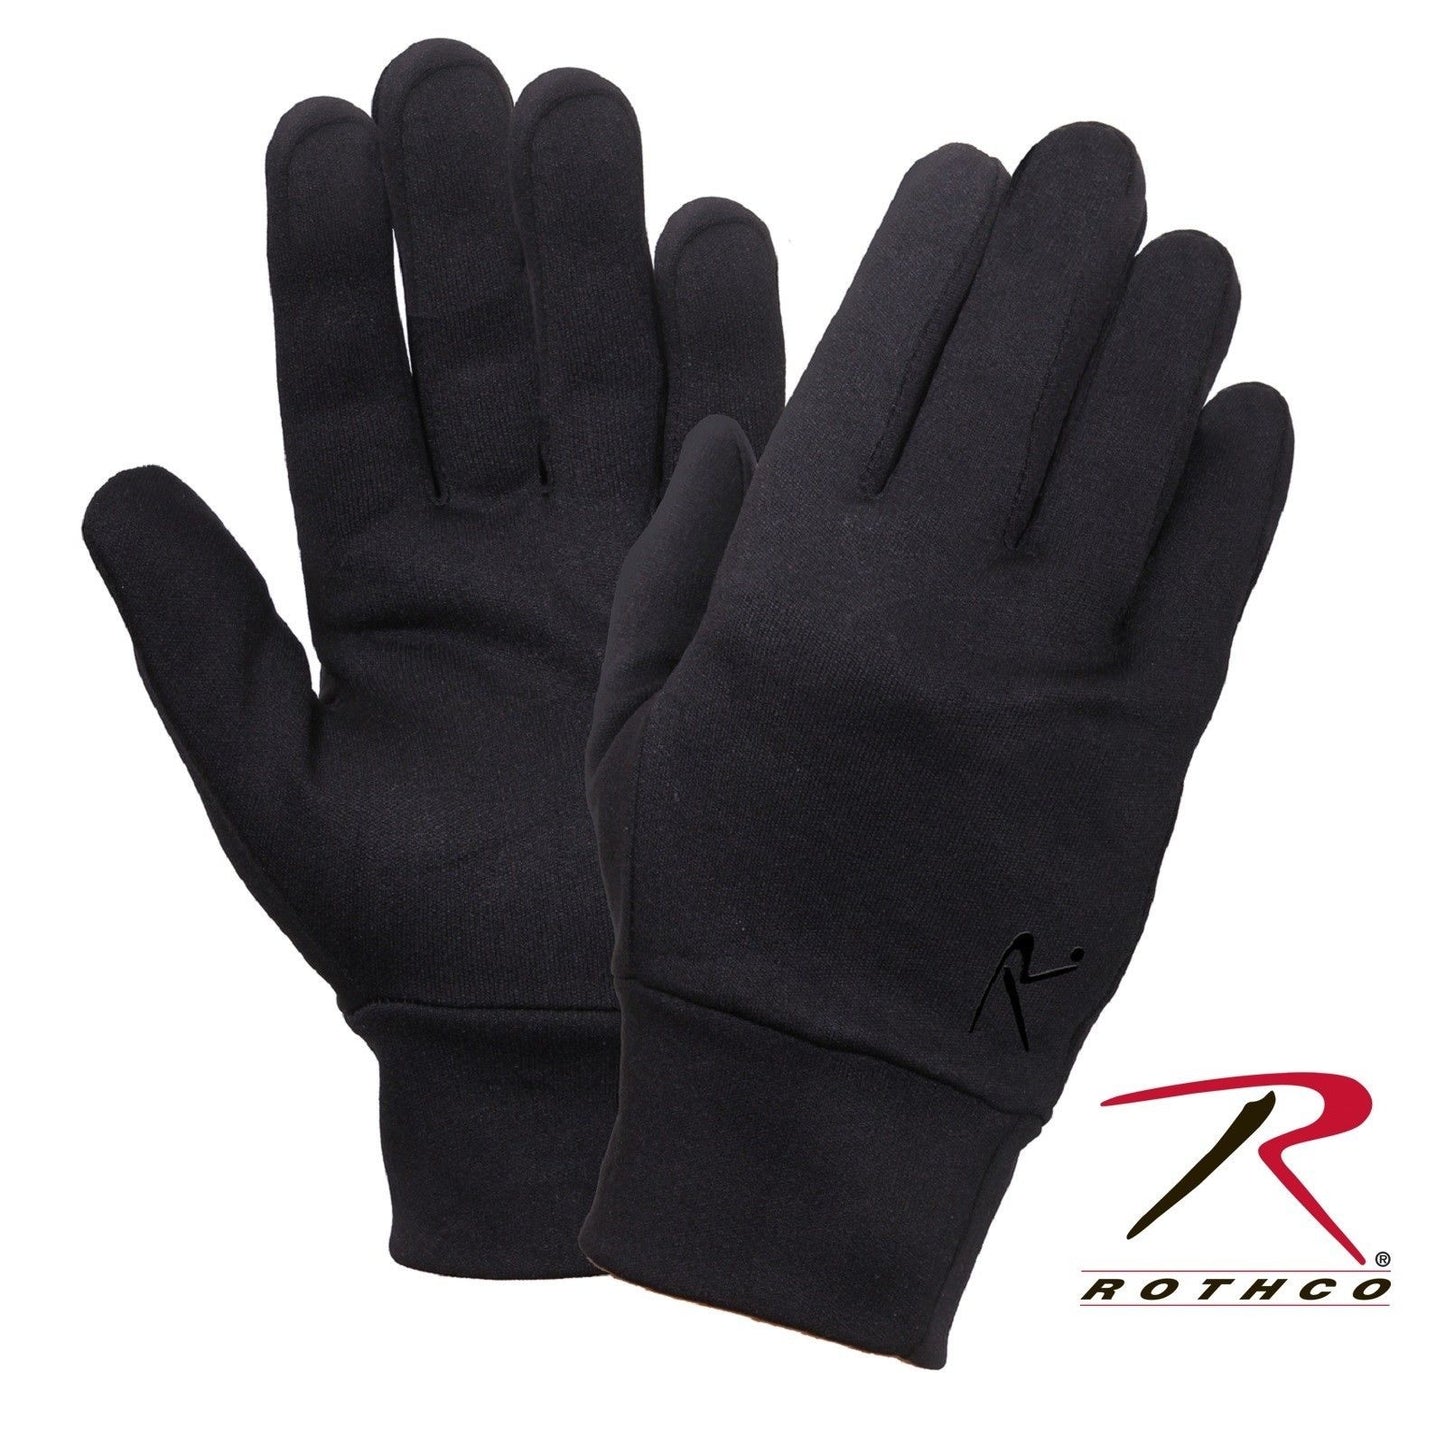 Rothco Polyester Black Glove Liner - Winter Glove Base Layer